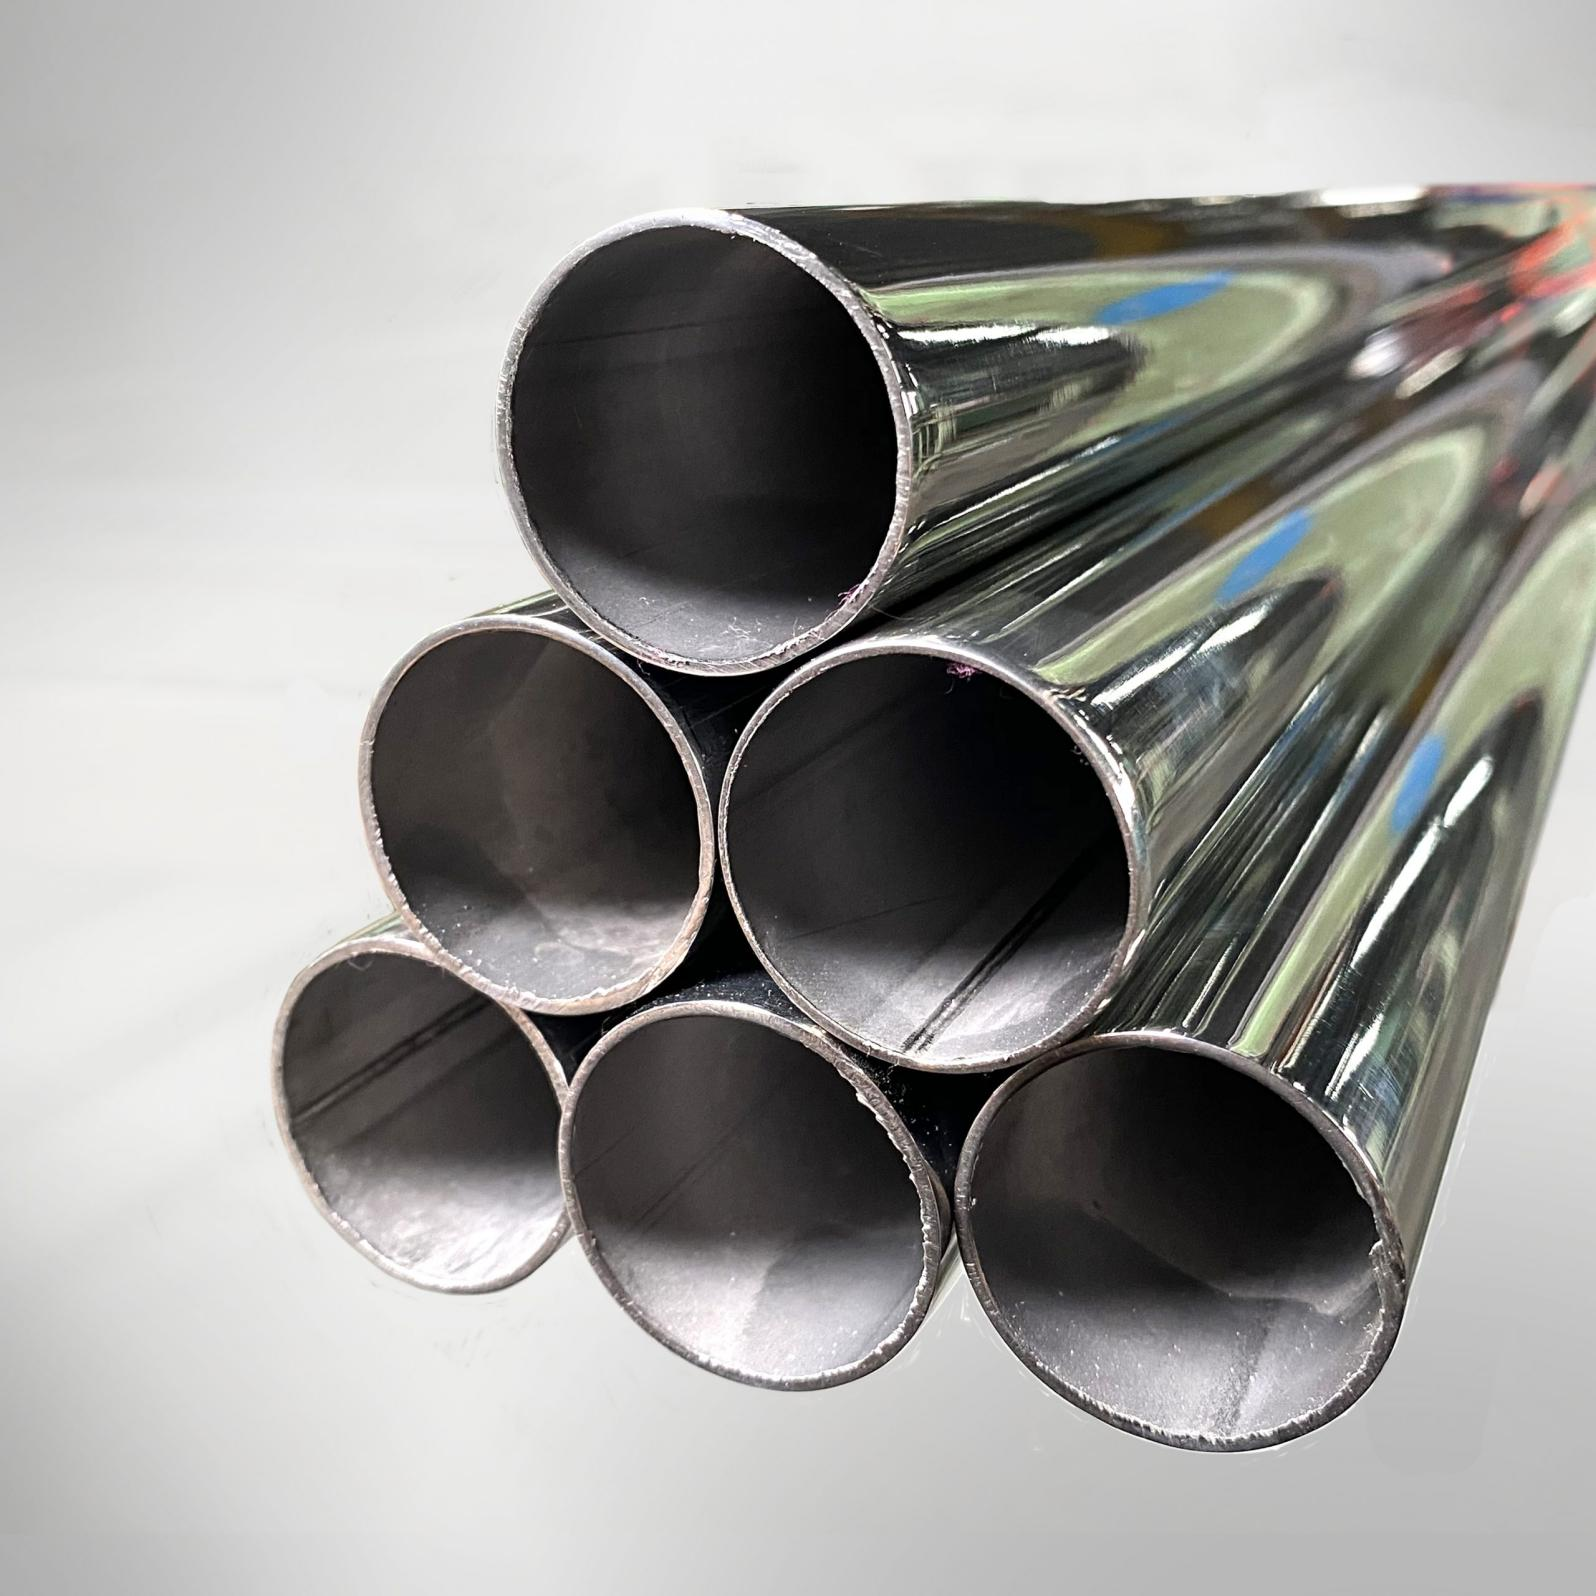 What can stainless steel pipe do